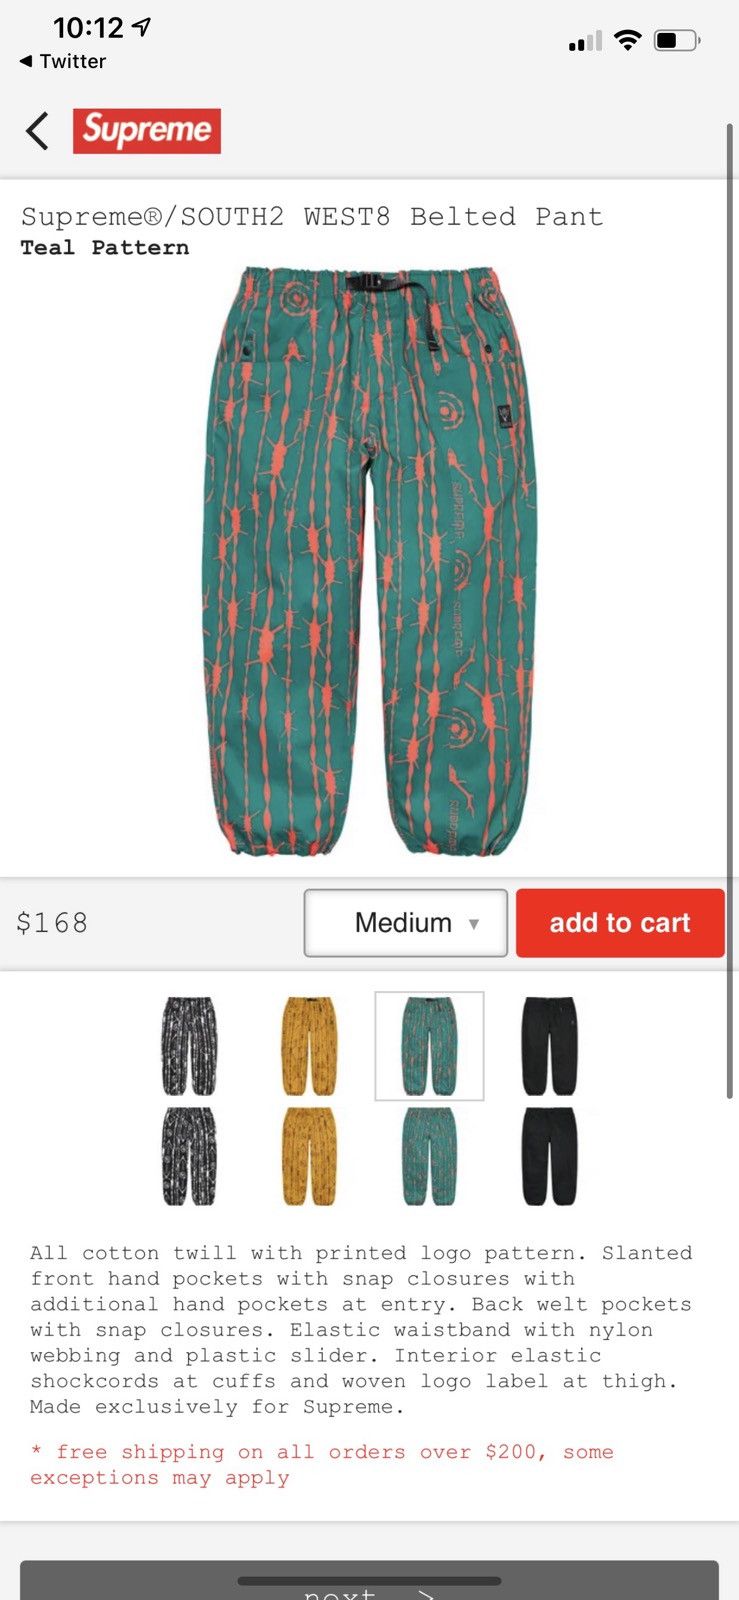 Supreme Supreme x South2 West8 Belted Pant - Teal(M) | Grailed